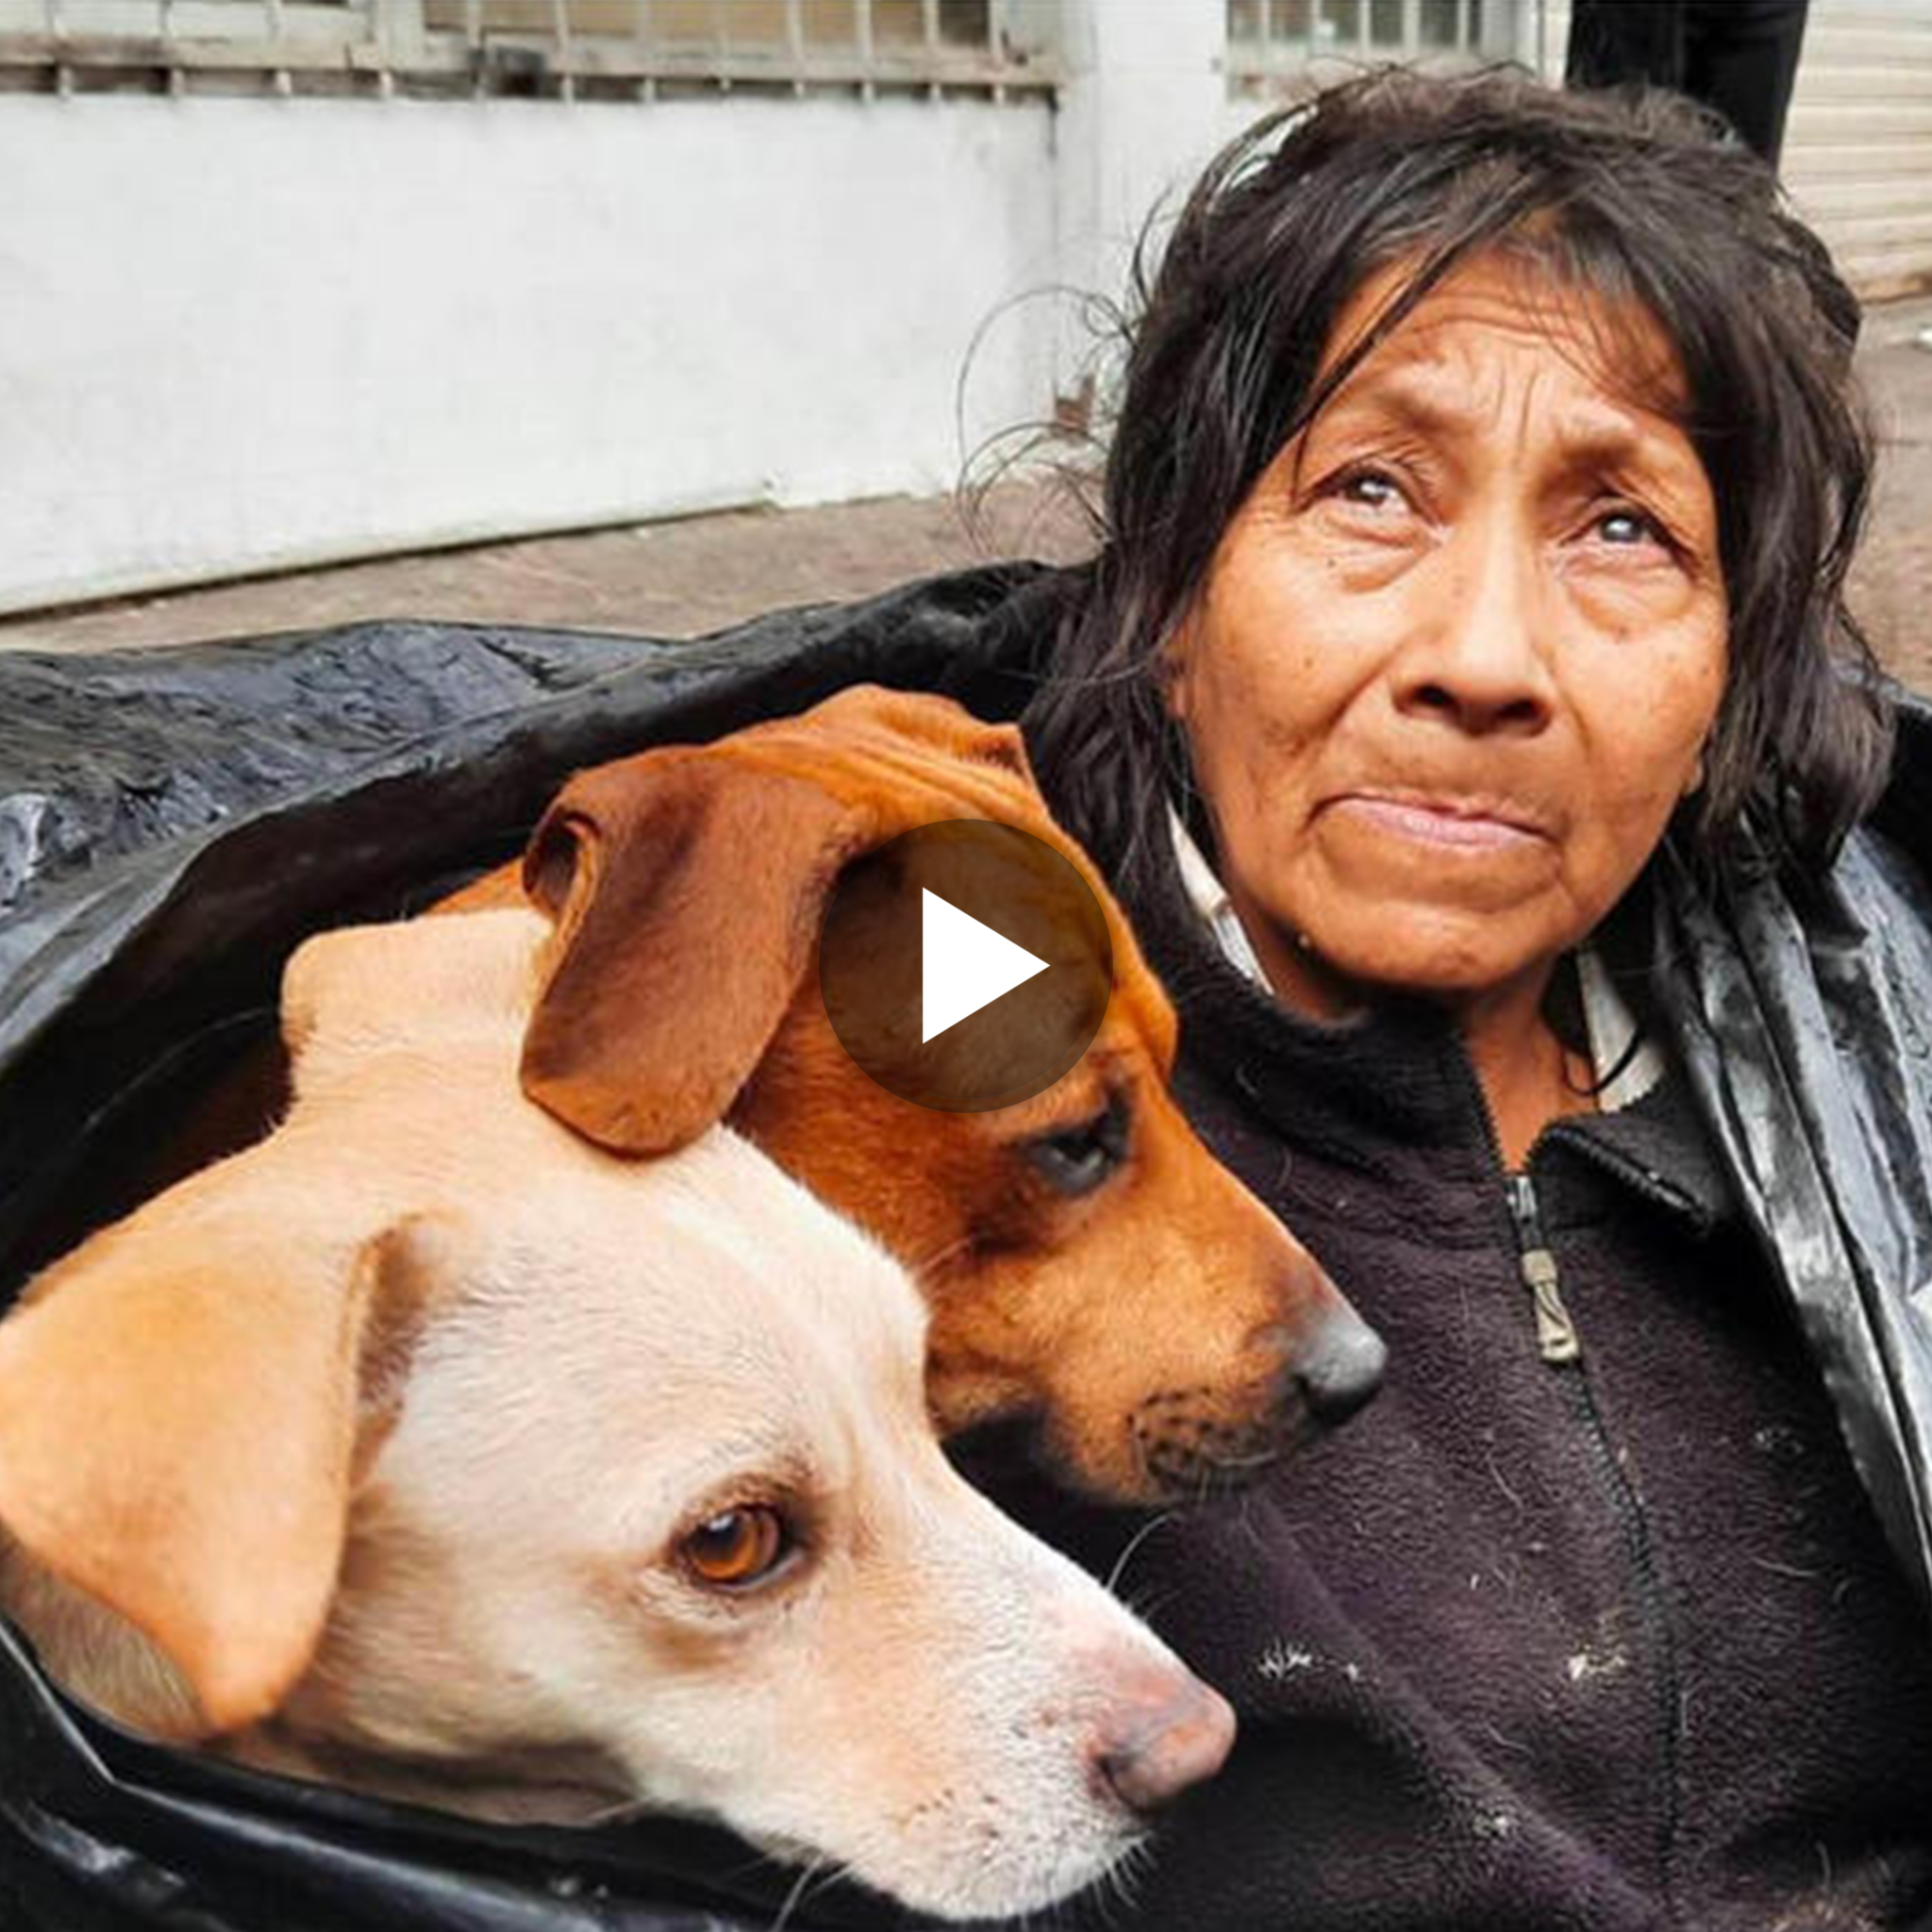 Heartwarming Story of Elderly Person Living with 6 Adorable Dogs in a Ball Bag Amidst Freezing Weather